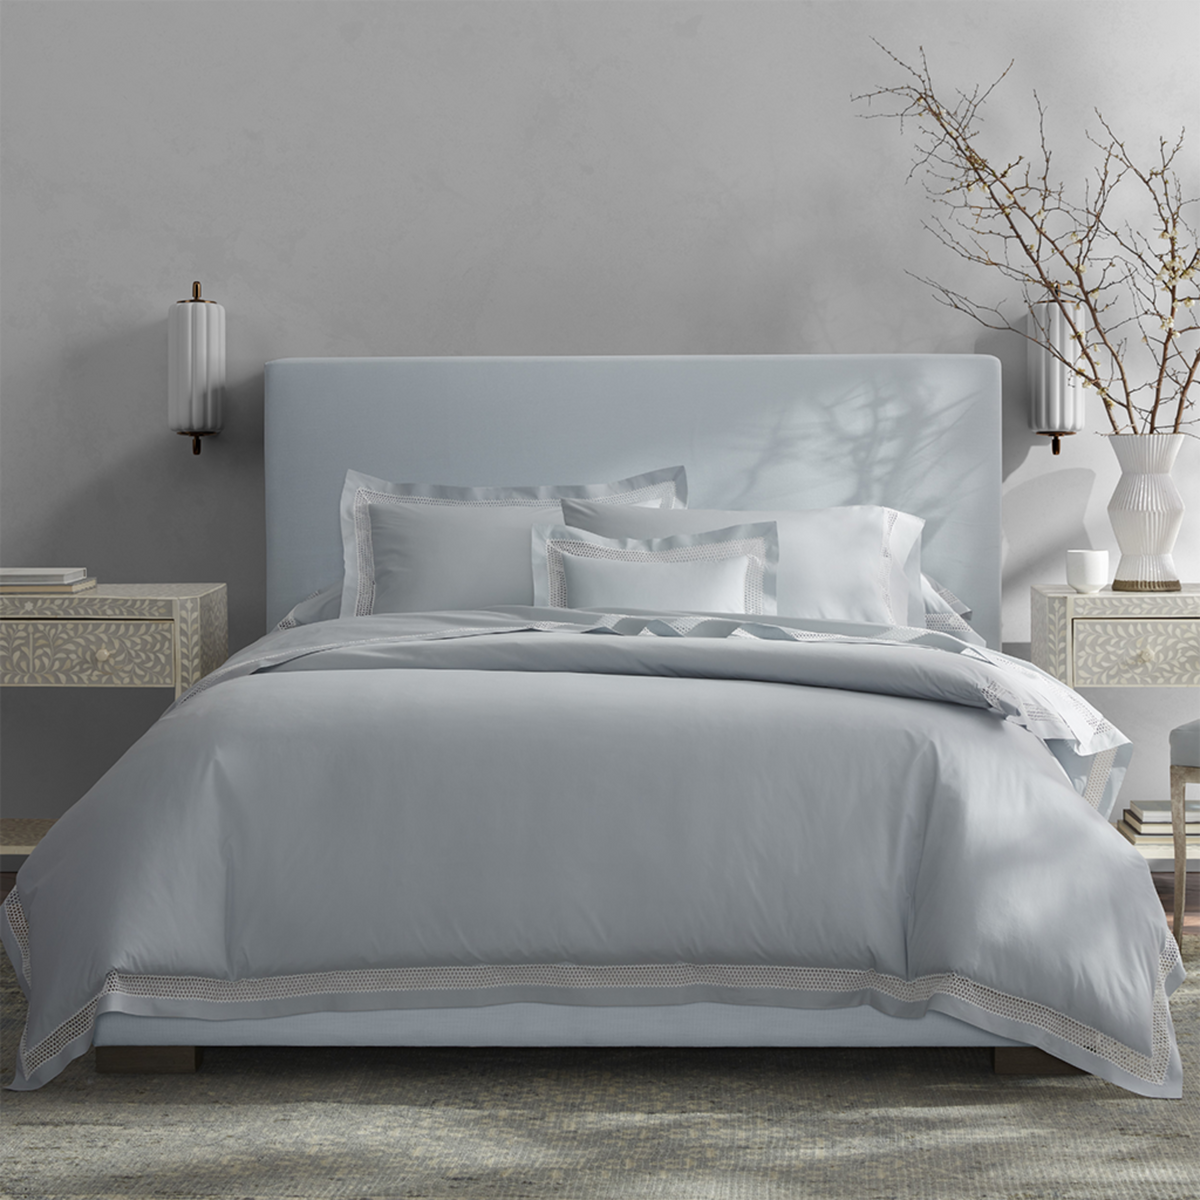 Full View of Matouk Cecily Bedding in Pool Color